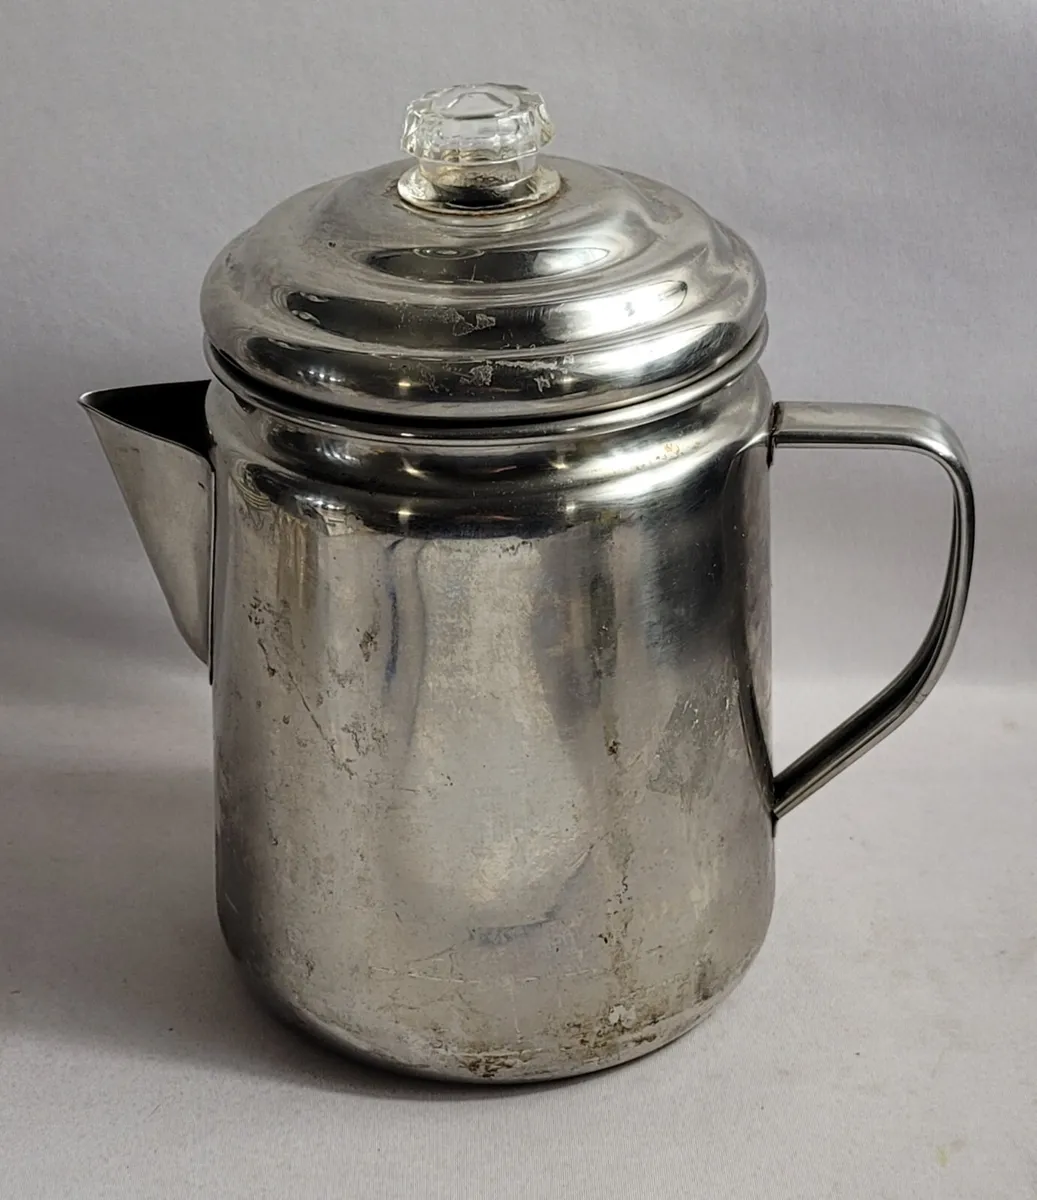 Tops Stainless Steel 12 Cup Coffee Percolator 